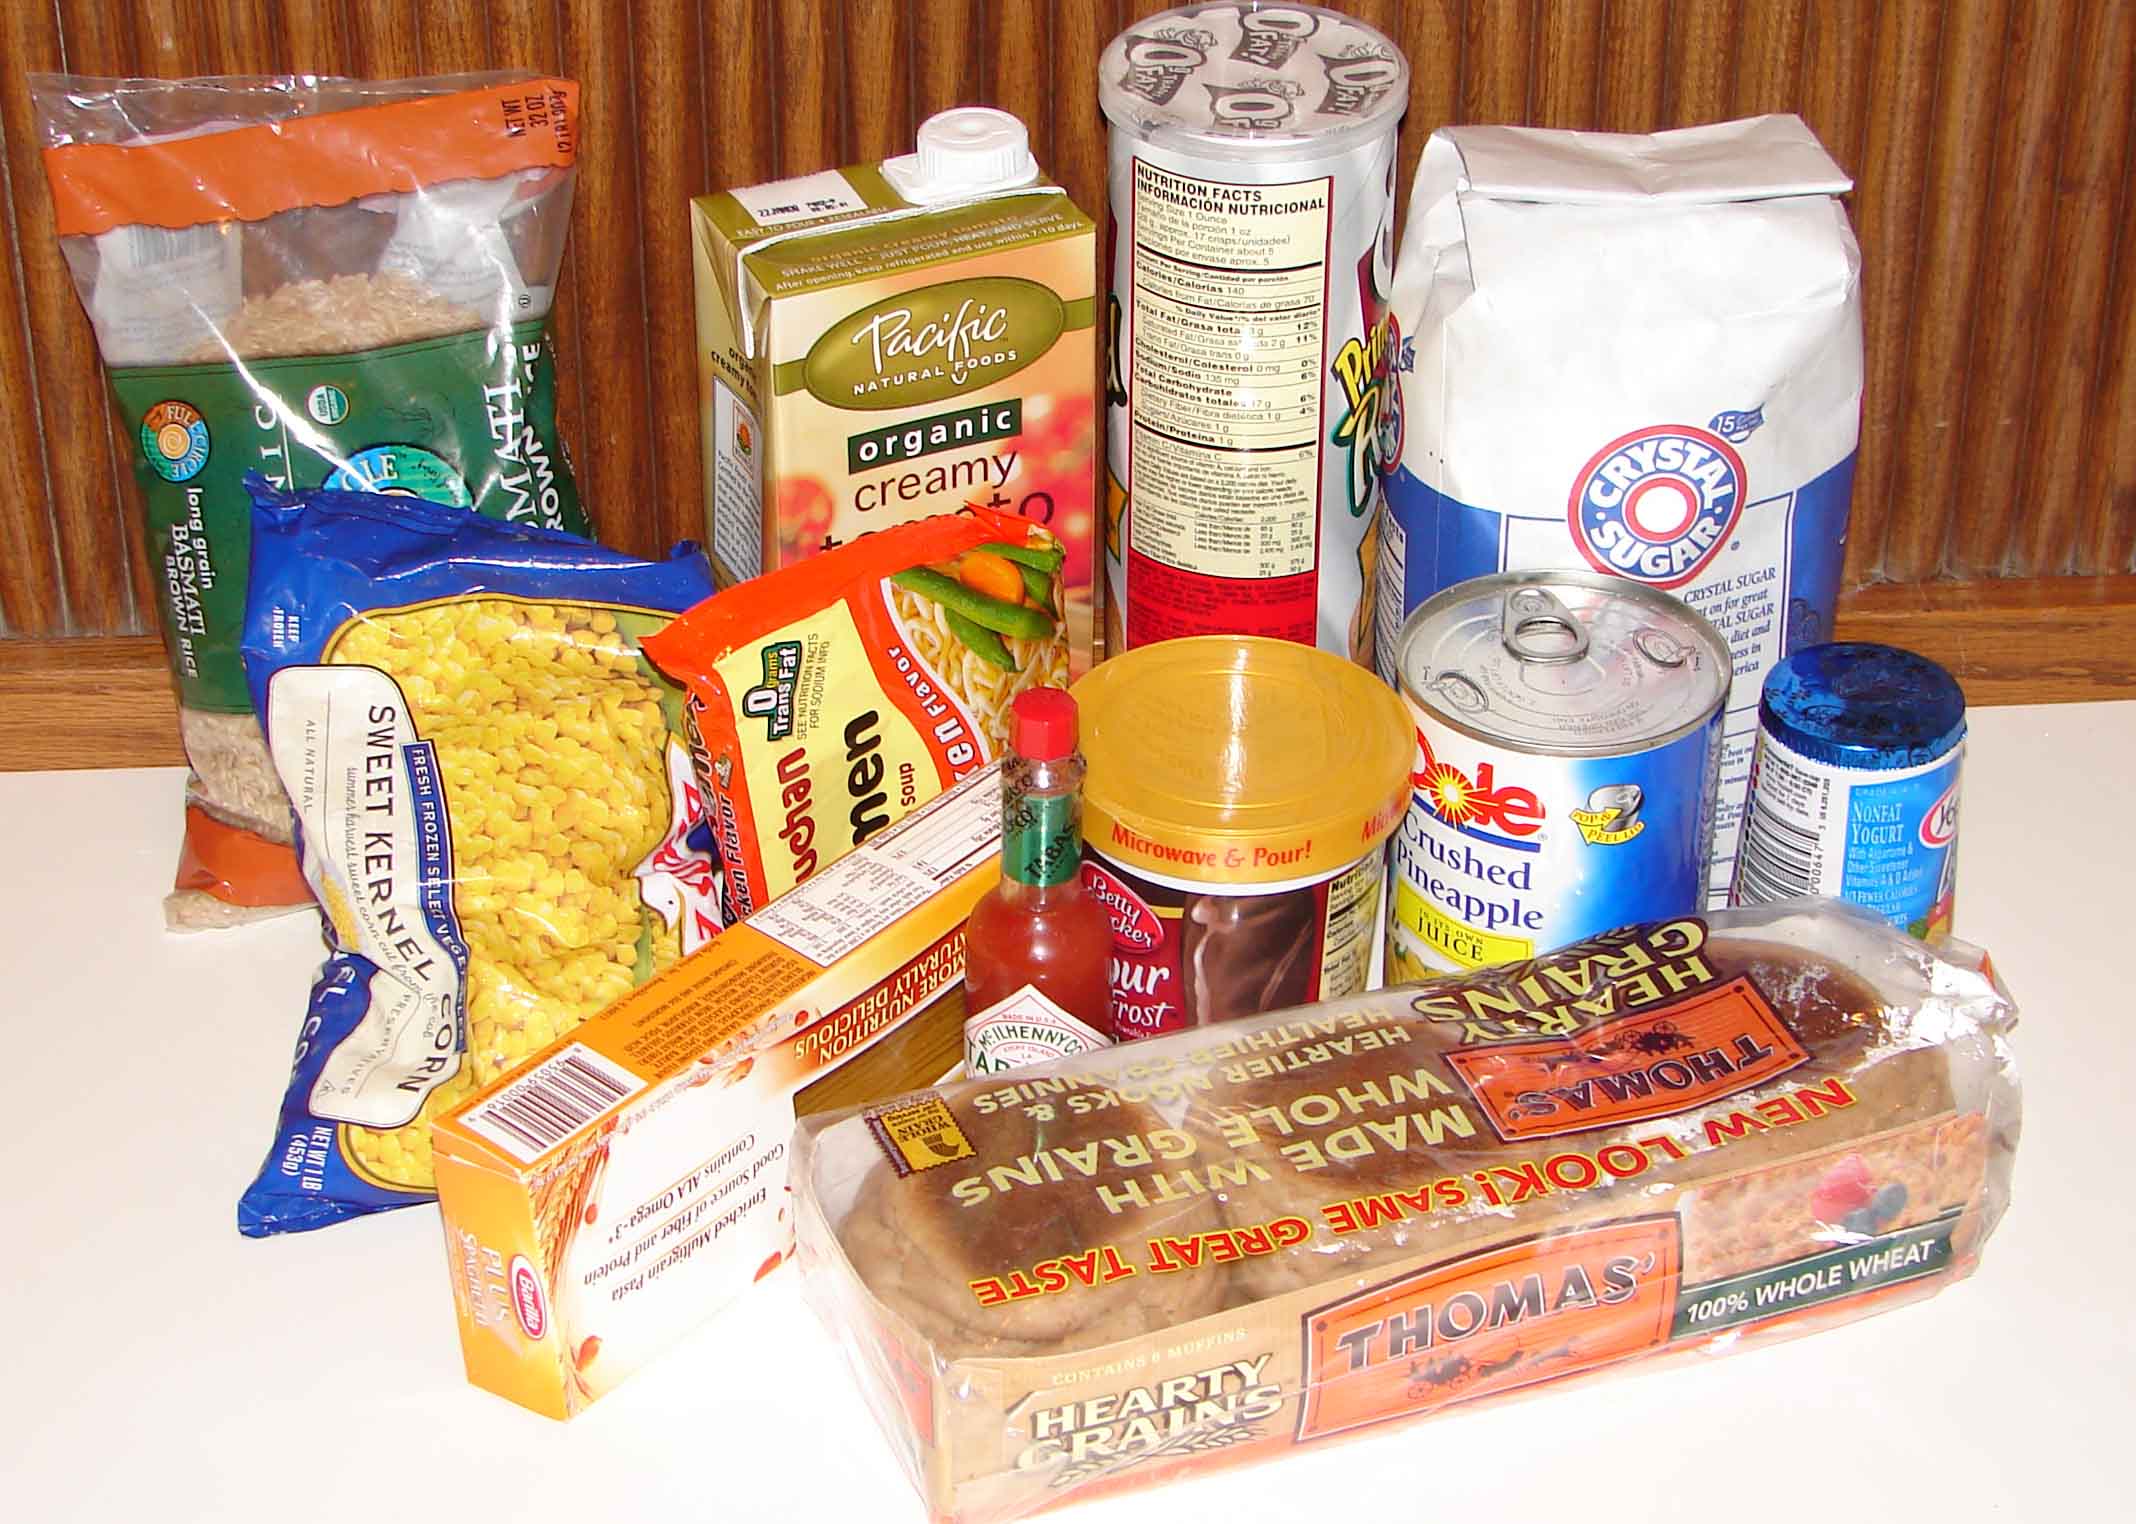 A collection of packaged food items.